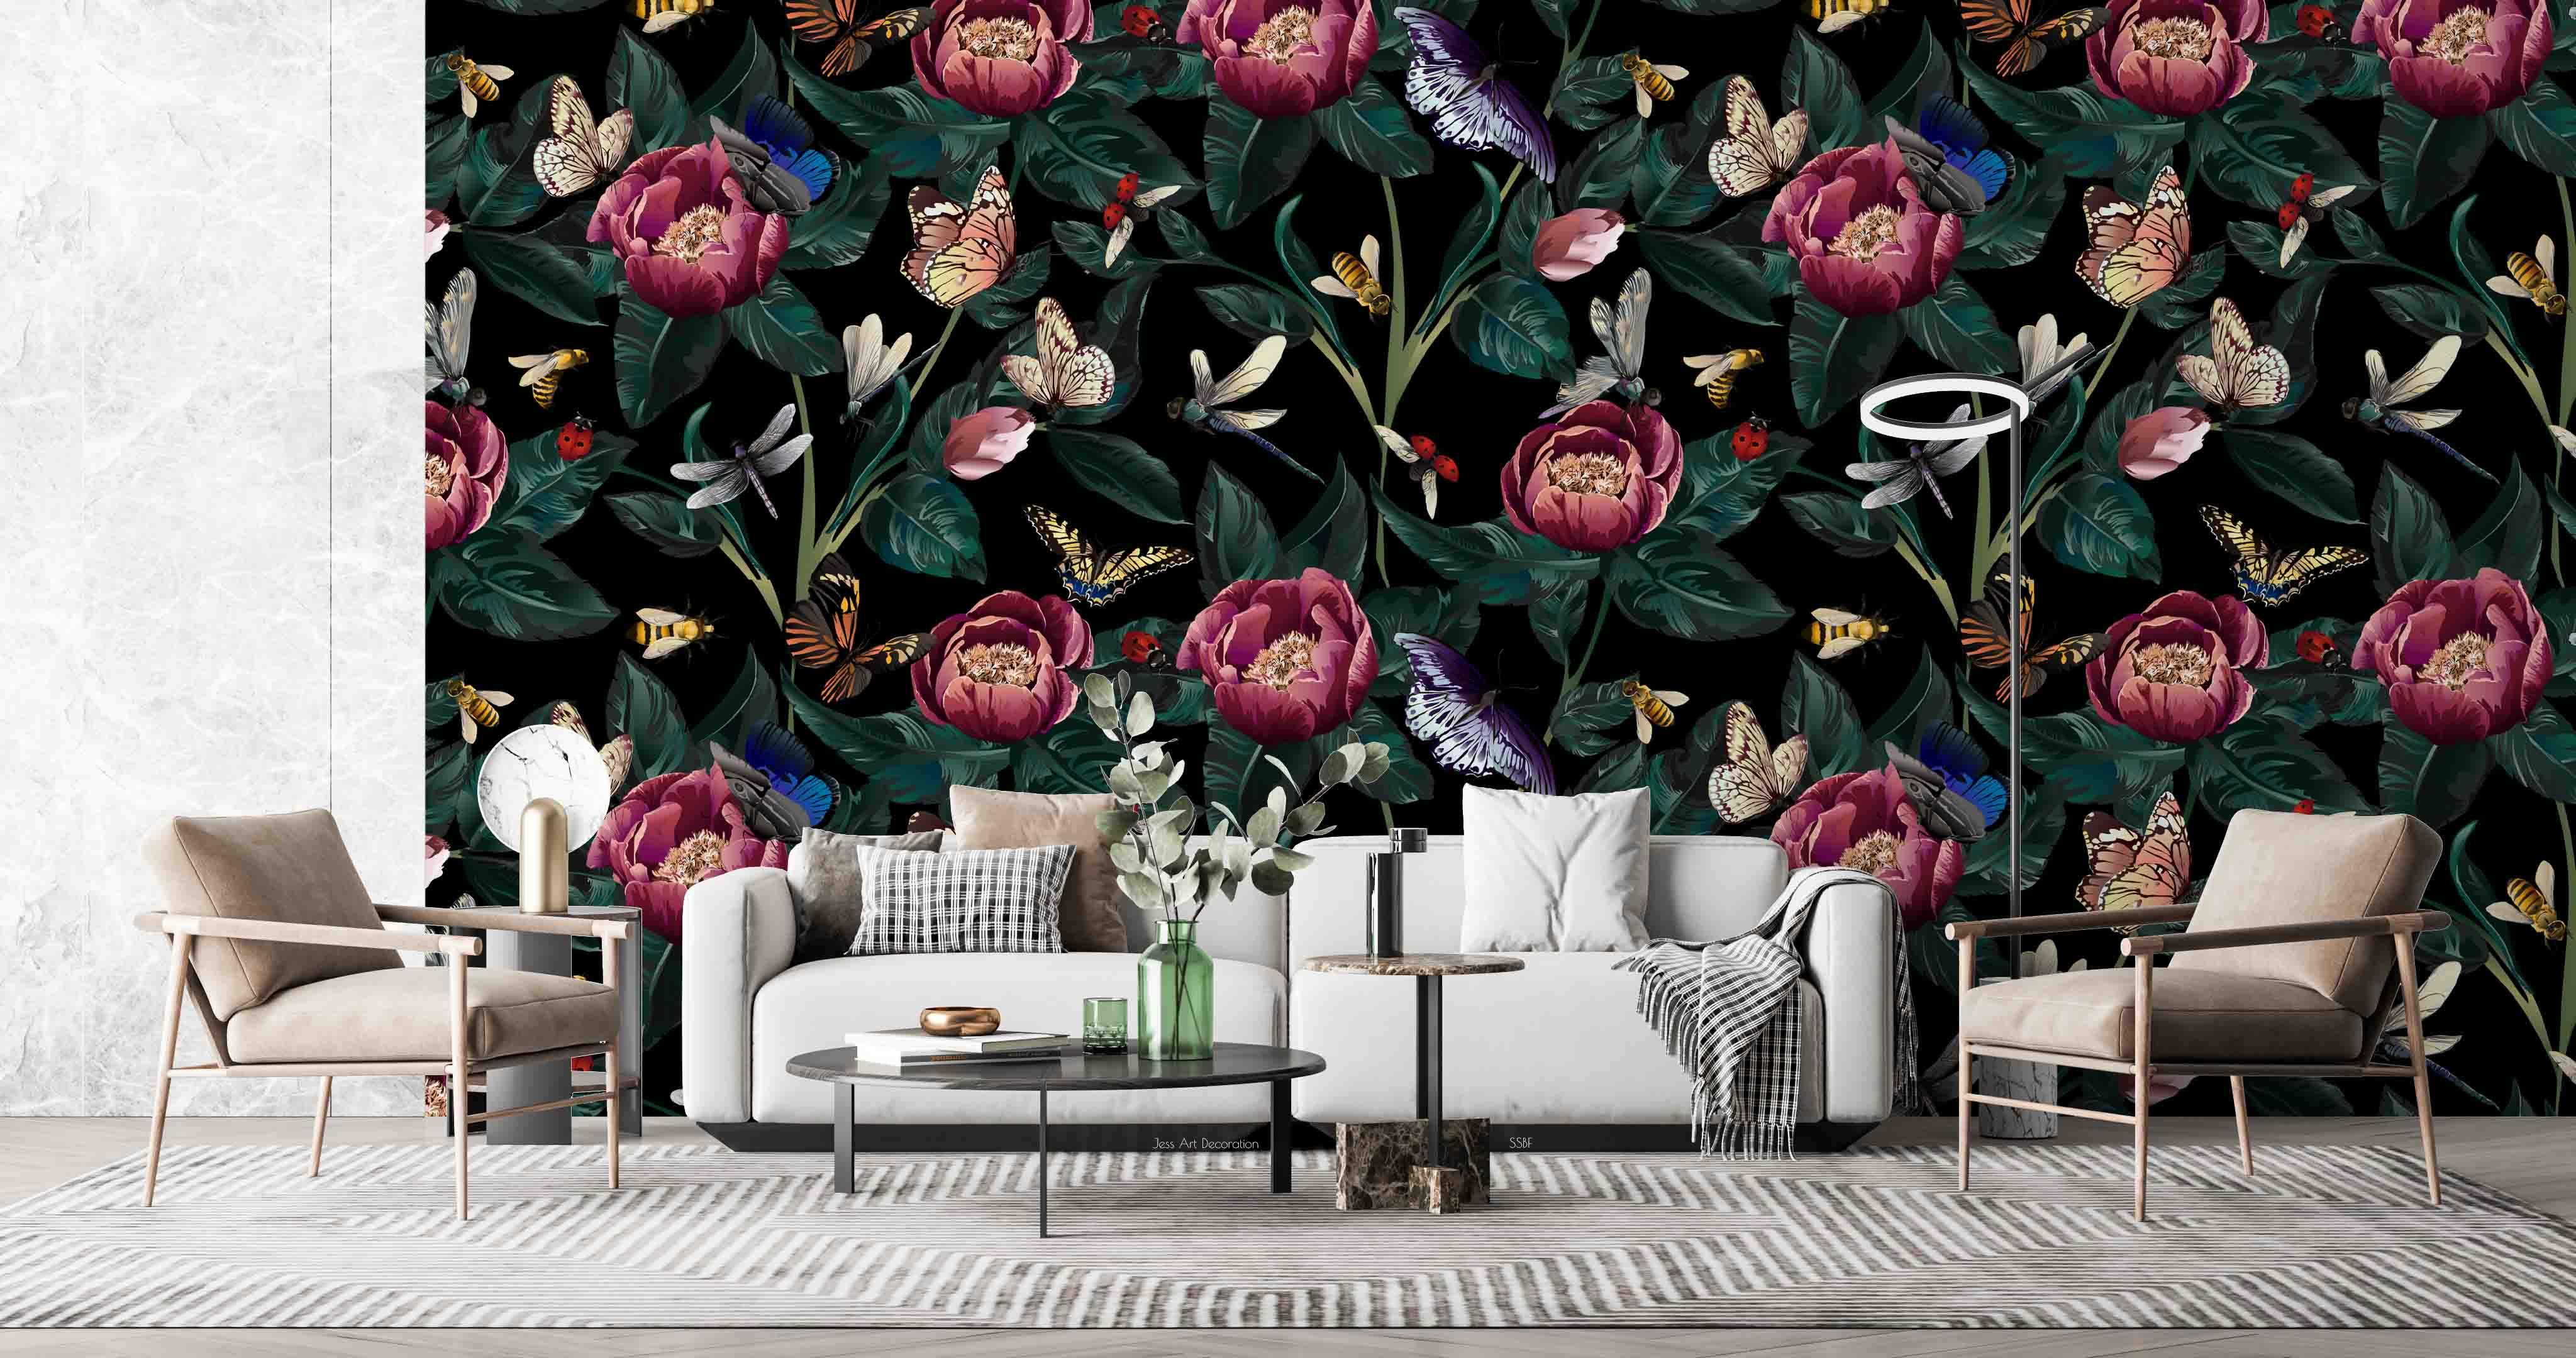 3D Vintage Blooming Red Flowers Leaf Butterfly Bee Wall Mural Wallpaper GD 3529- Jess Art Decoration